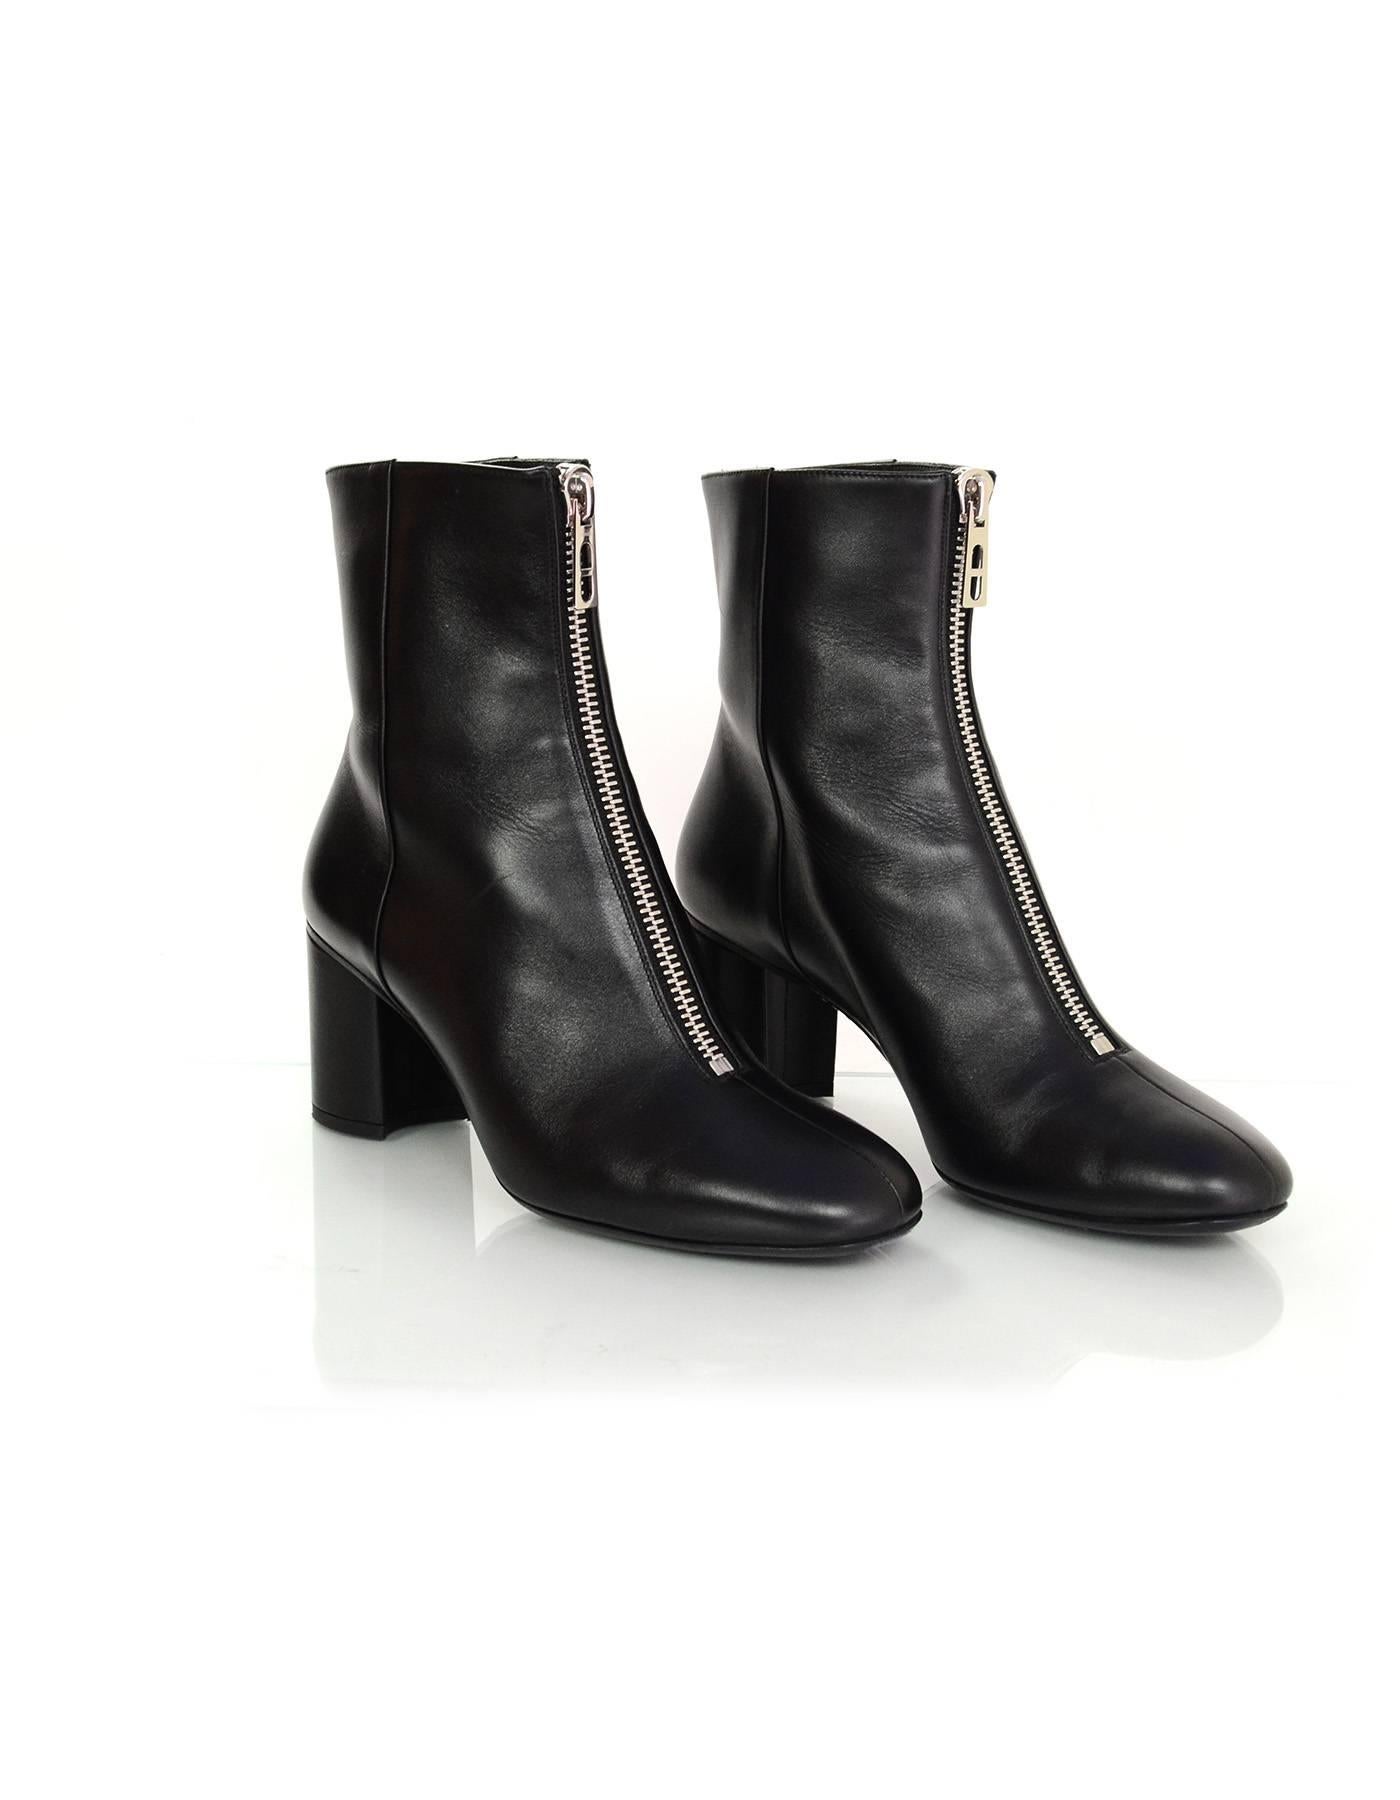 black leather boots with zipper